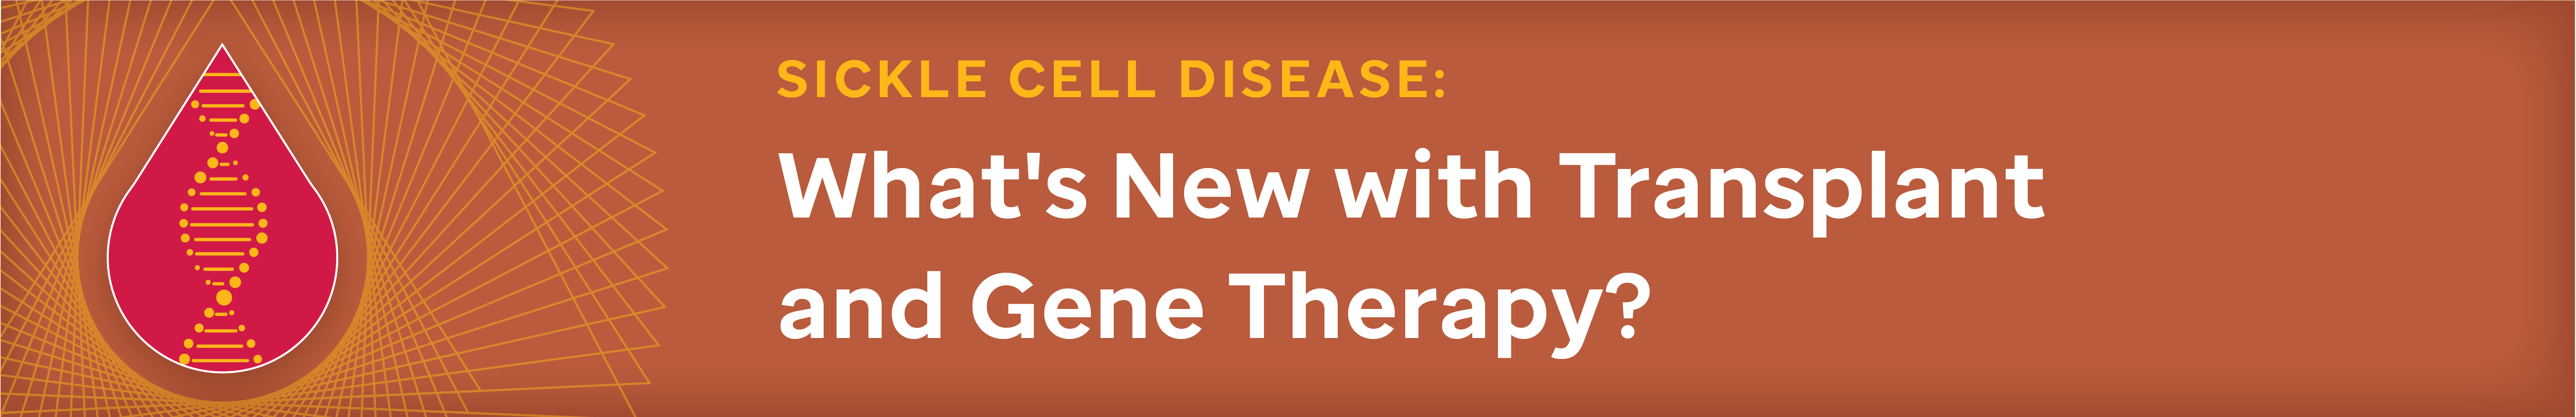 2022 Sickle Cell Disease: What's New with Transplant and Gene Therapy? Banner